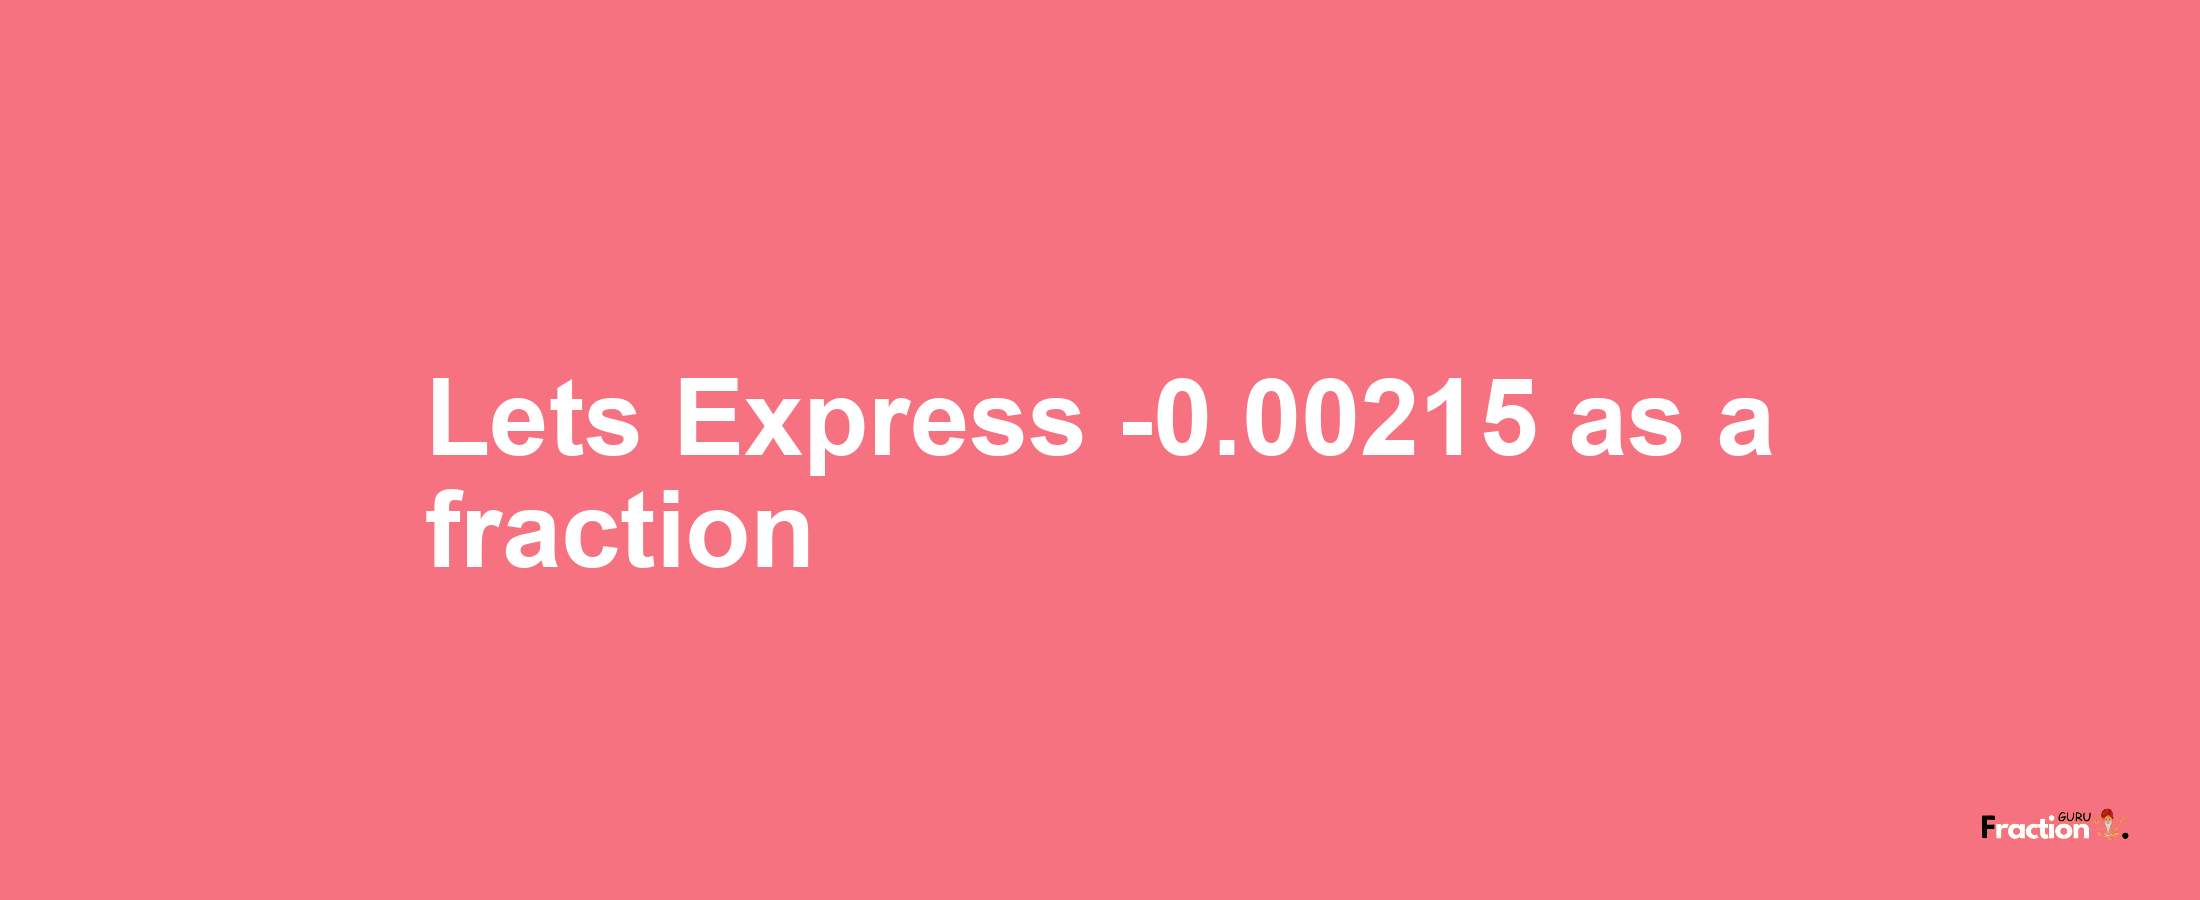 Lets Express -0.00215 as afraction